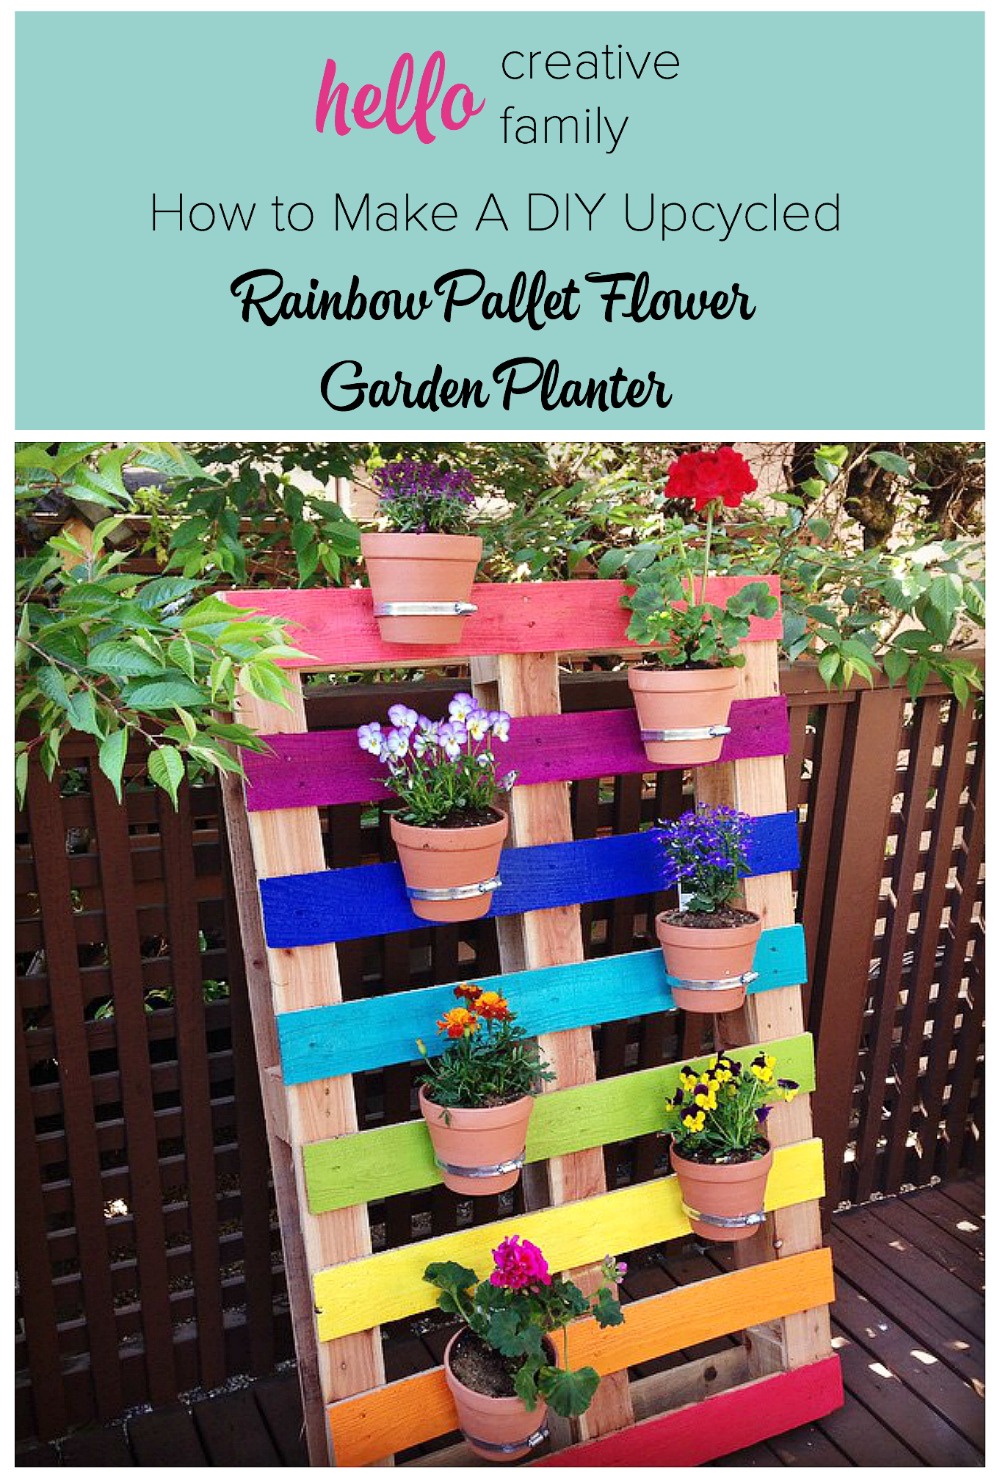 pallet planter diy garden rainbow upcycled flower gardening kids projects pallets outdoor creative wood colorful family project weekend bright hello